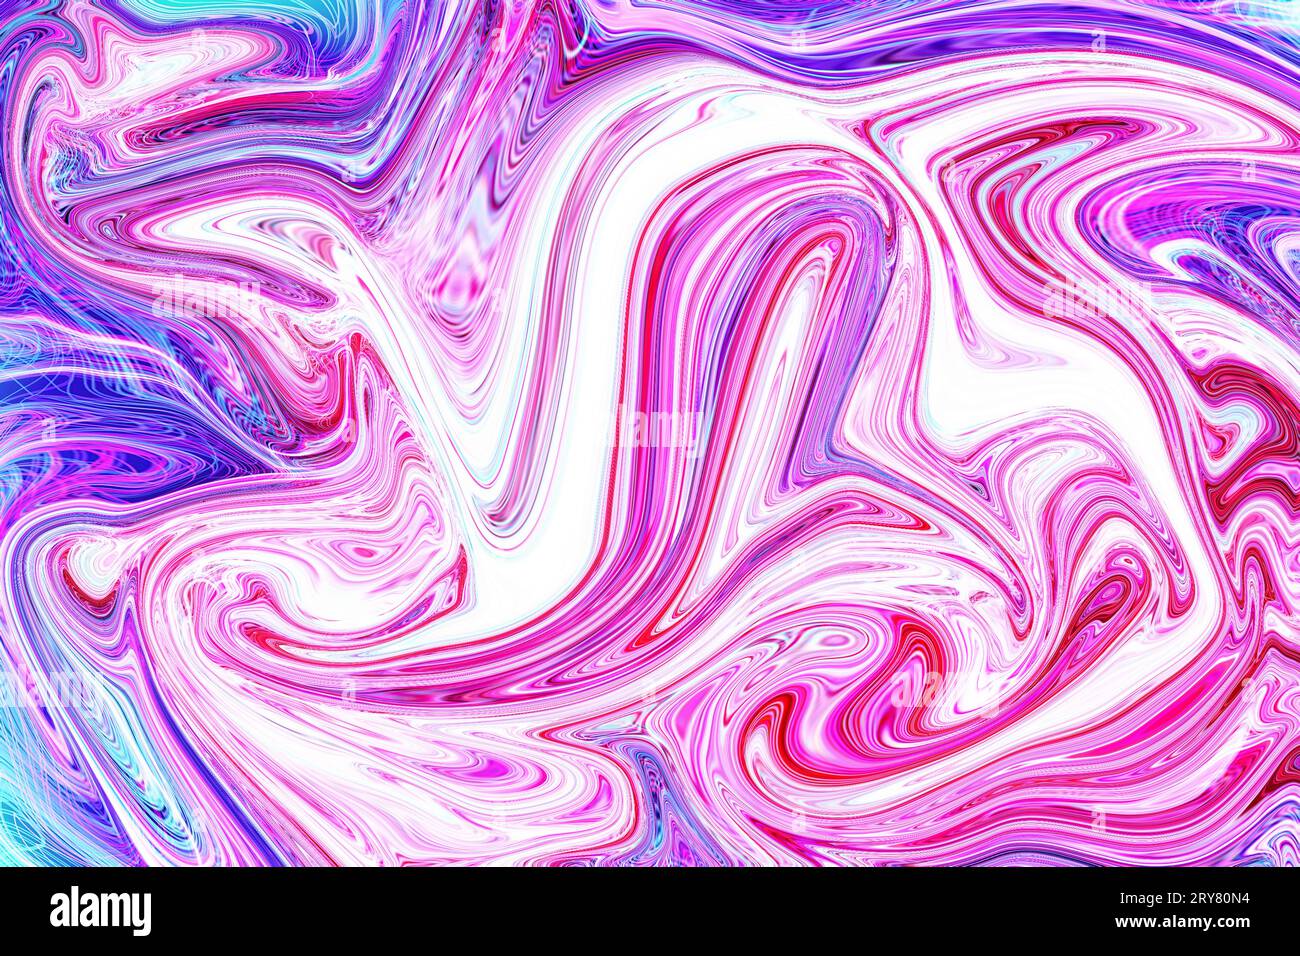 transcending boundaries with artistic expression lilac and purple paint dynamically forming an engaging structure on the abstract colorful background Stock Photo